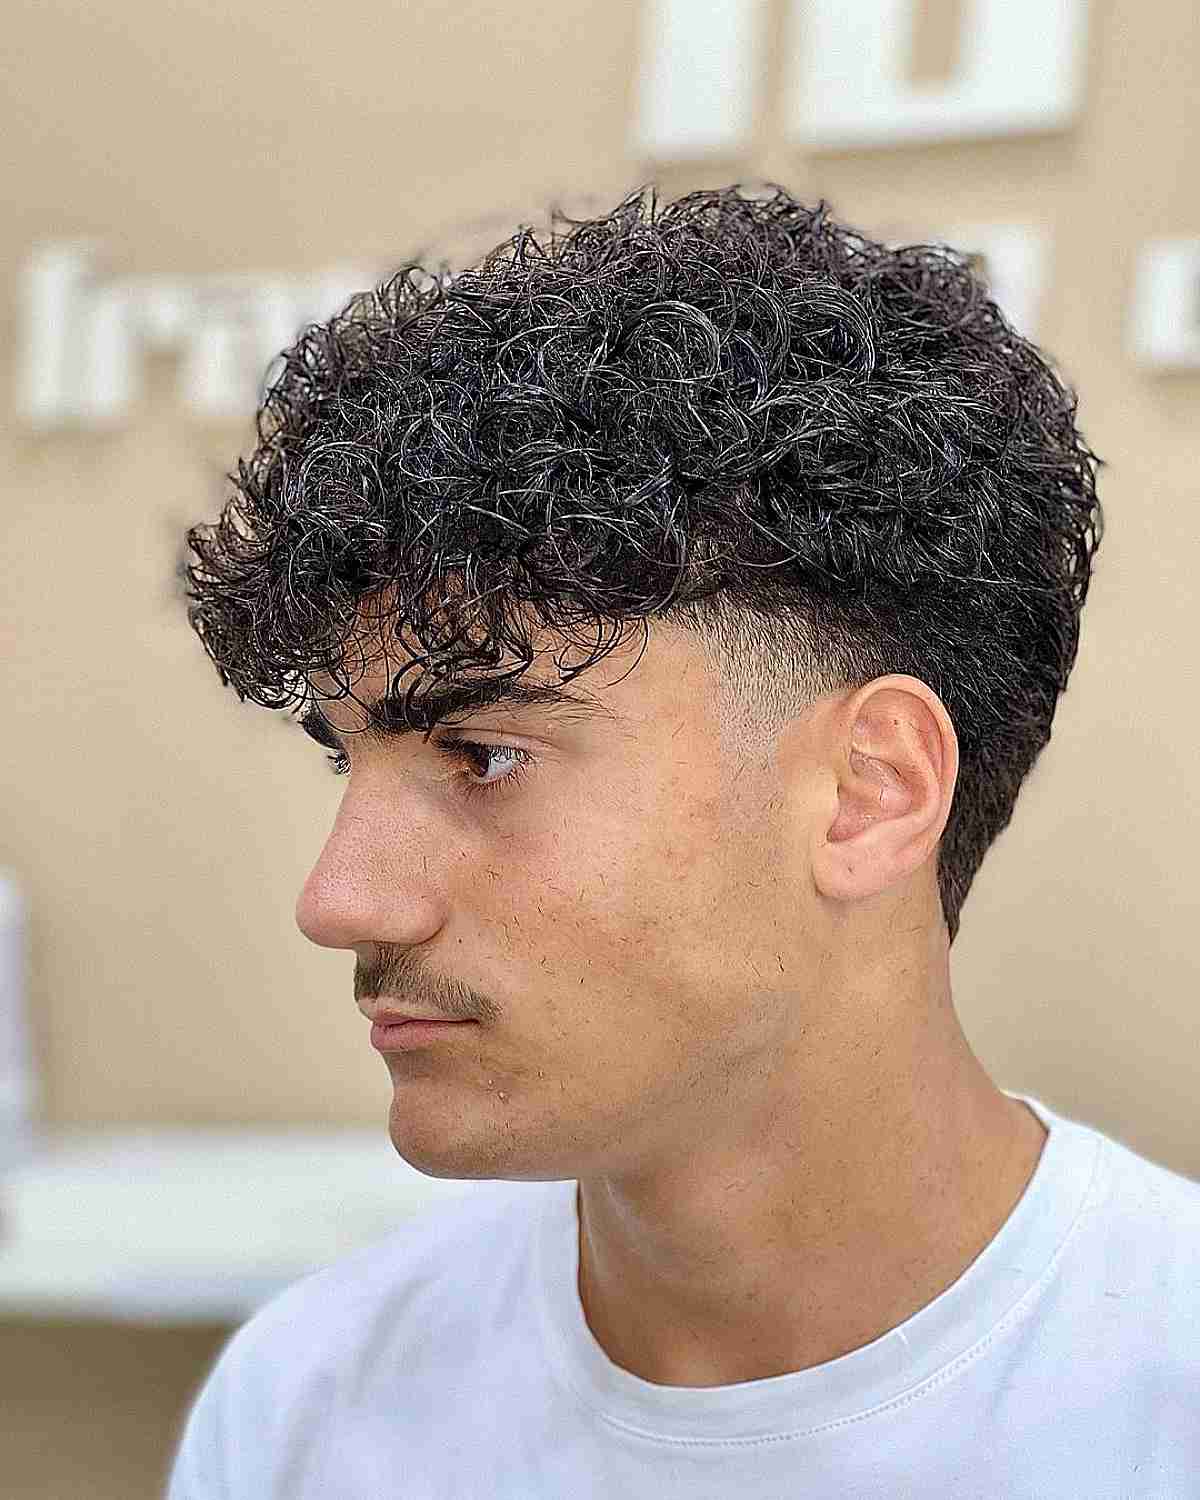 Low Taper Fade With Curly Hair: 25 Glamorous Styles To Look Exquisite!